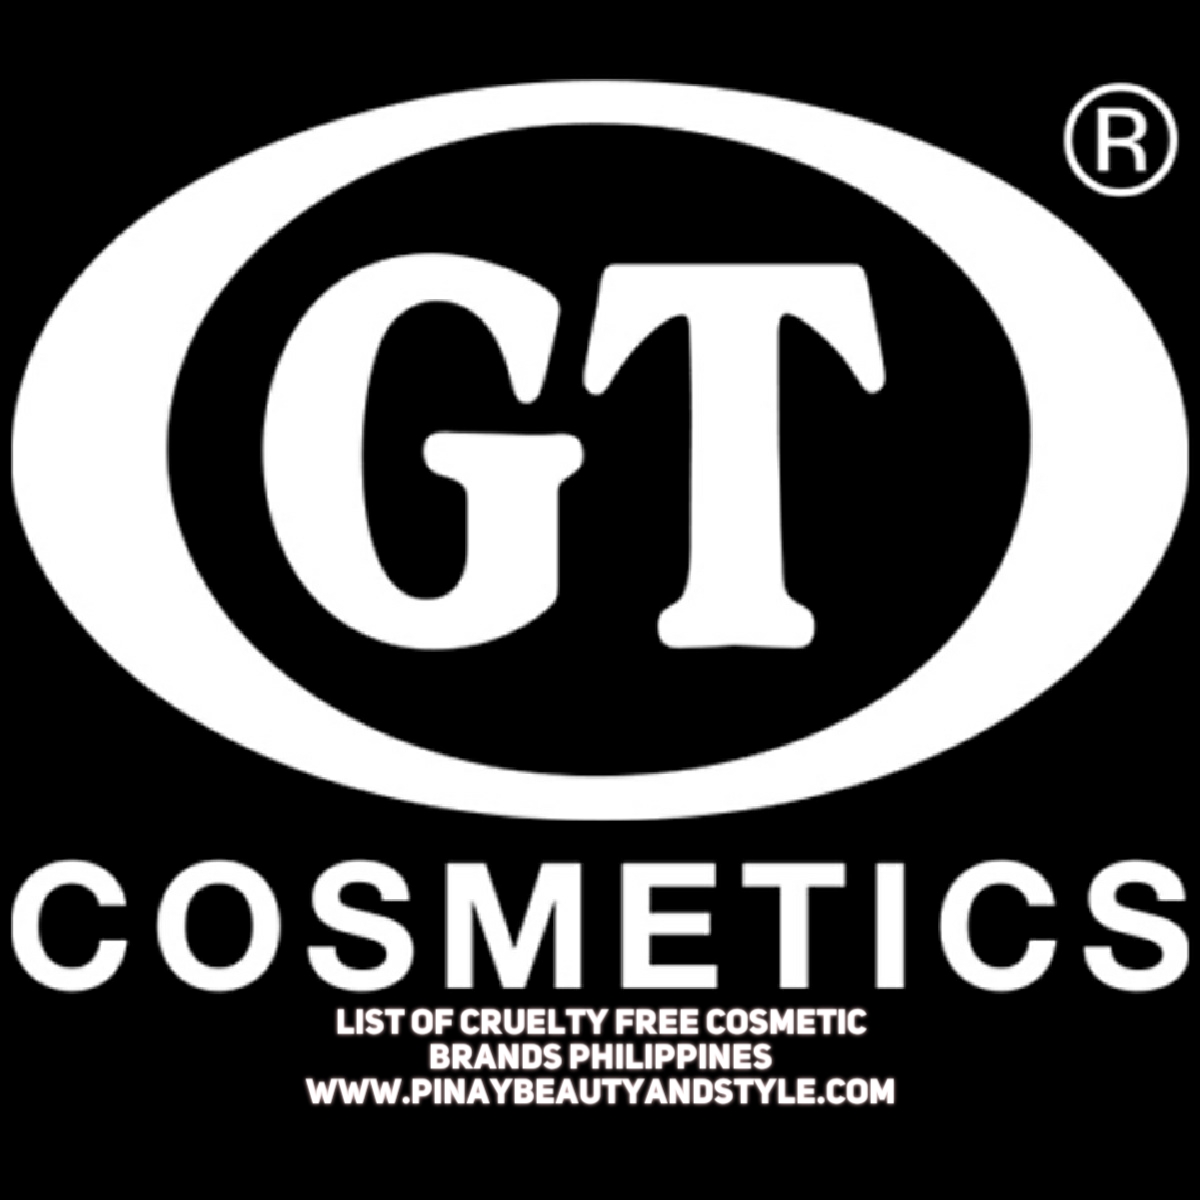 25 Cruelty Free Cosmetic Brands Philippines 21 Crueltyfreeph Crueltyfreebeauty Crueltyfreemakeup Crueltyfreebrands Pinay Beauty And Style